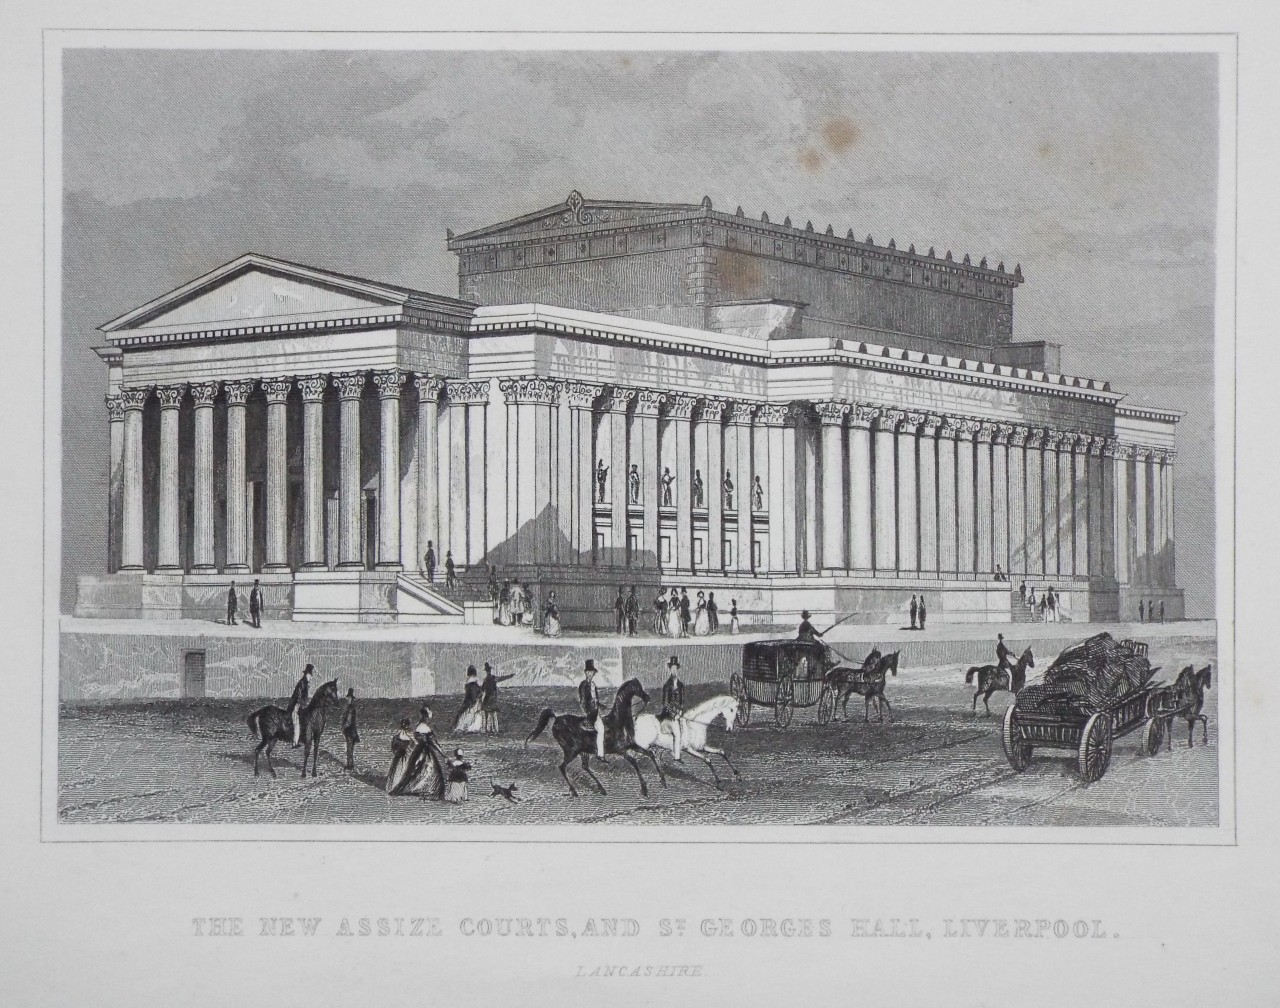 Print - The New Assize Courts, and St. Georges Hall, Liverpool. Lancashire.